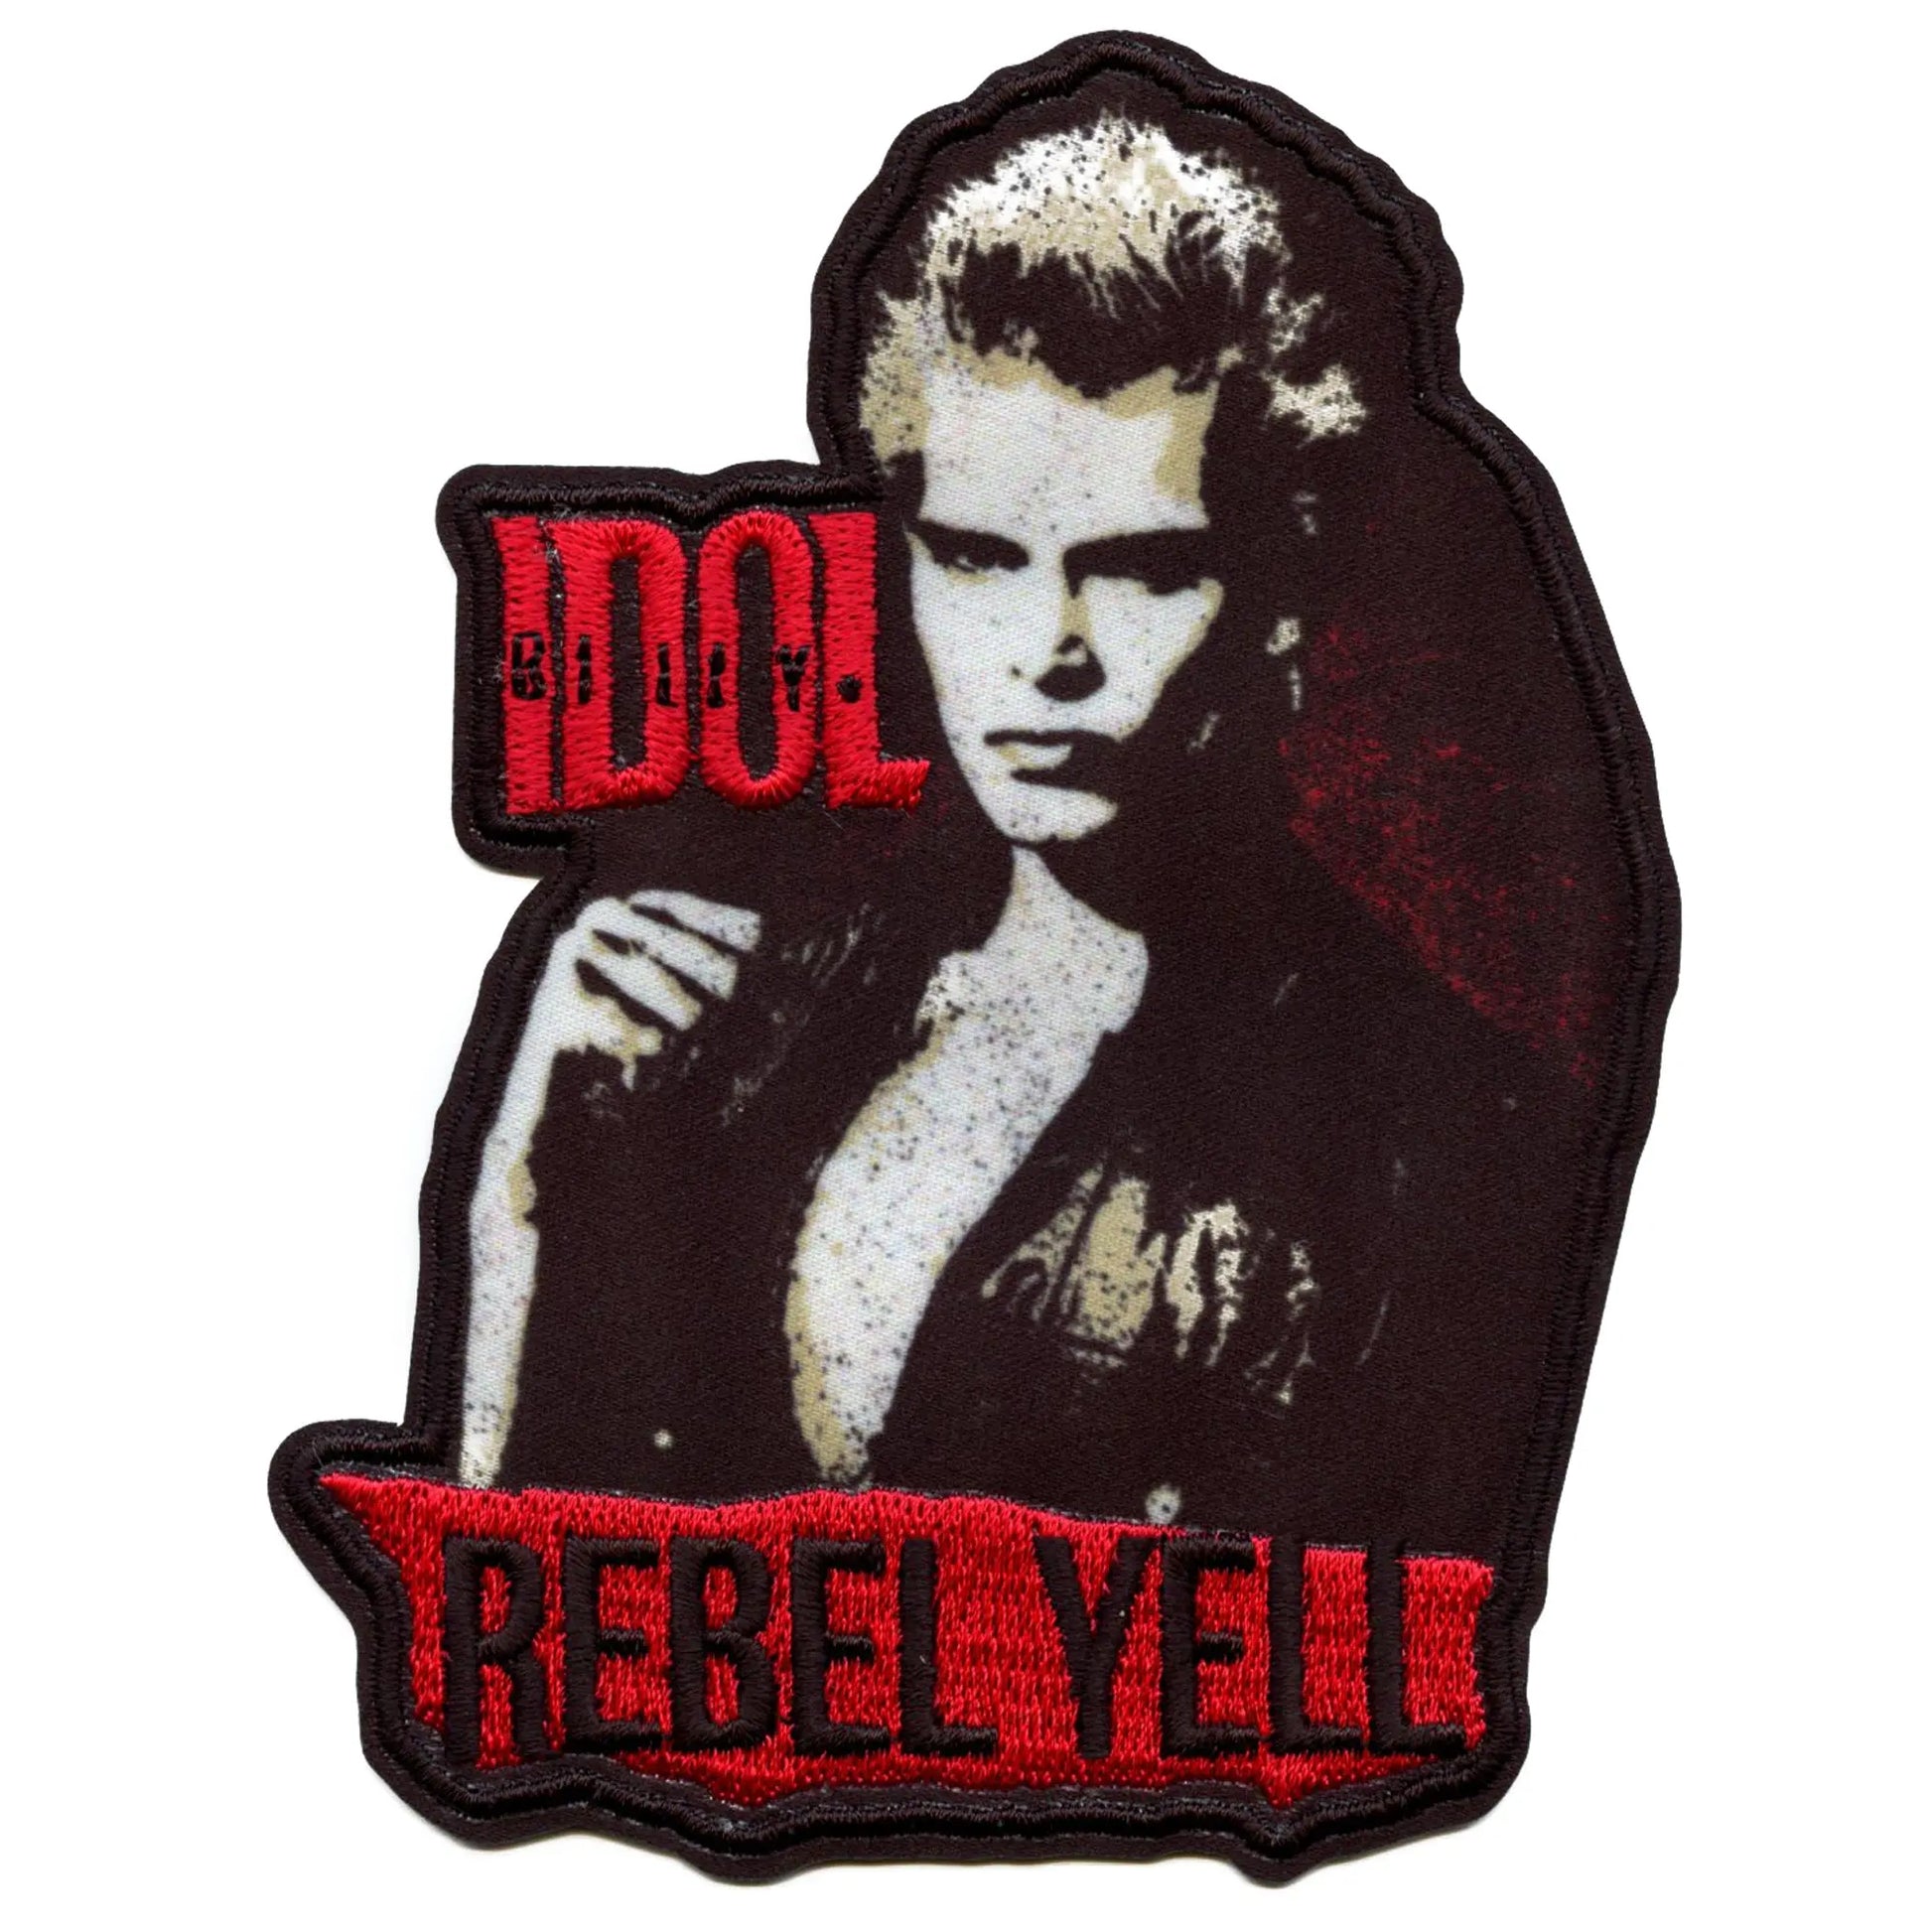 Billy Idol Rebel Yell Patch Fist 70s Rock Icon Embroidered Iron On